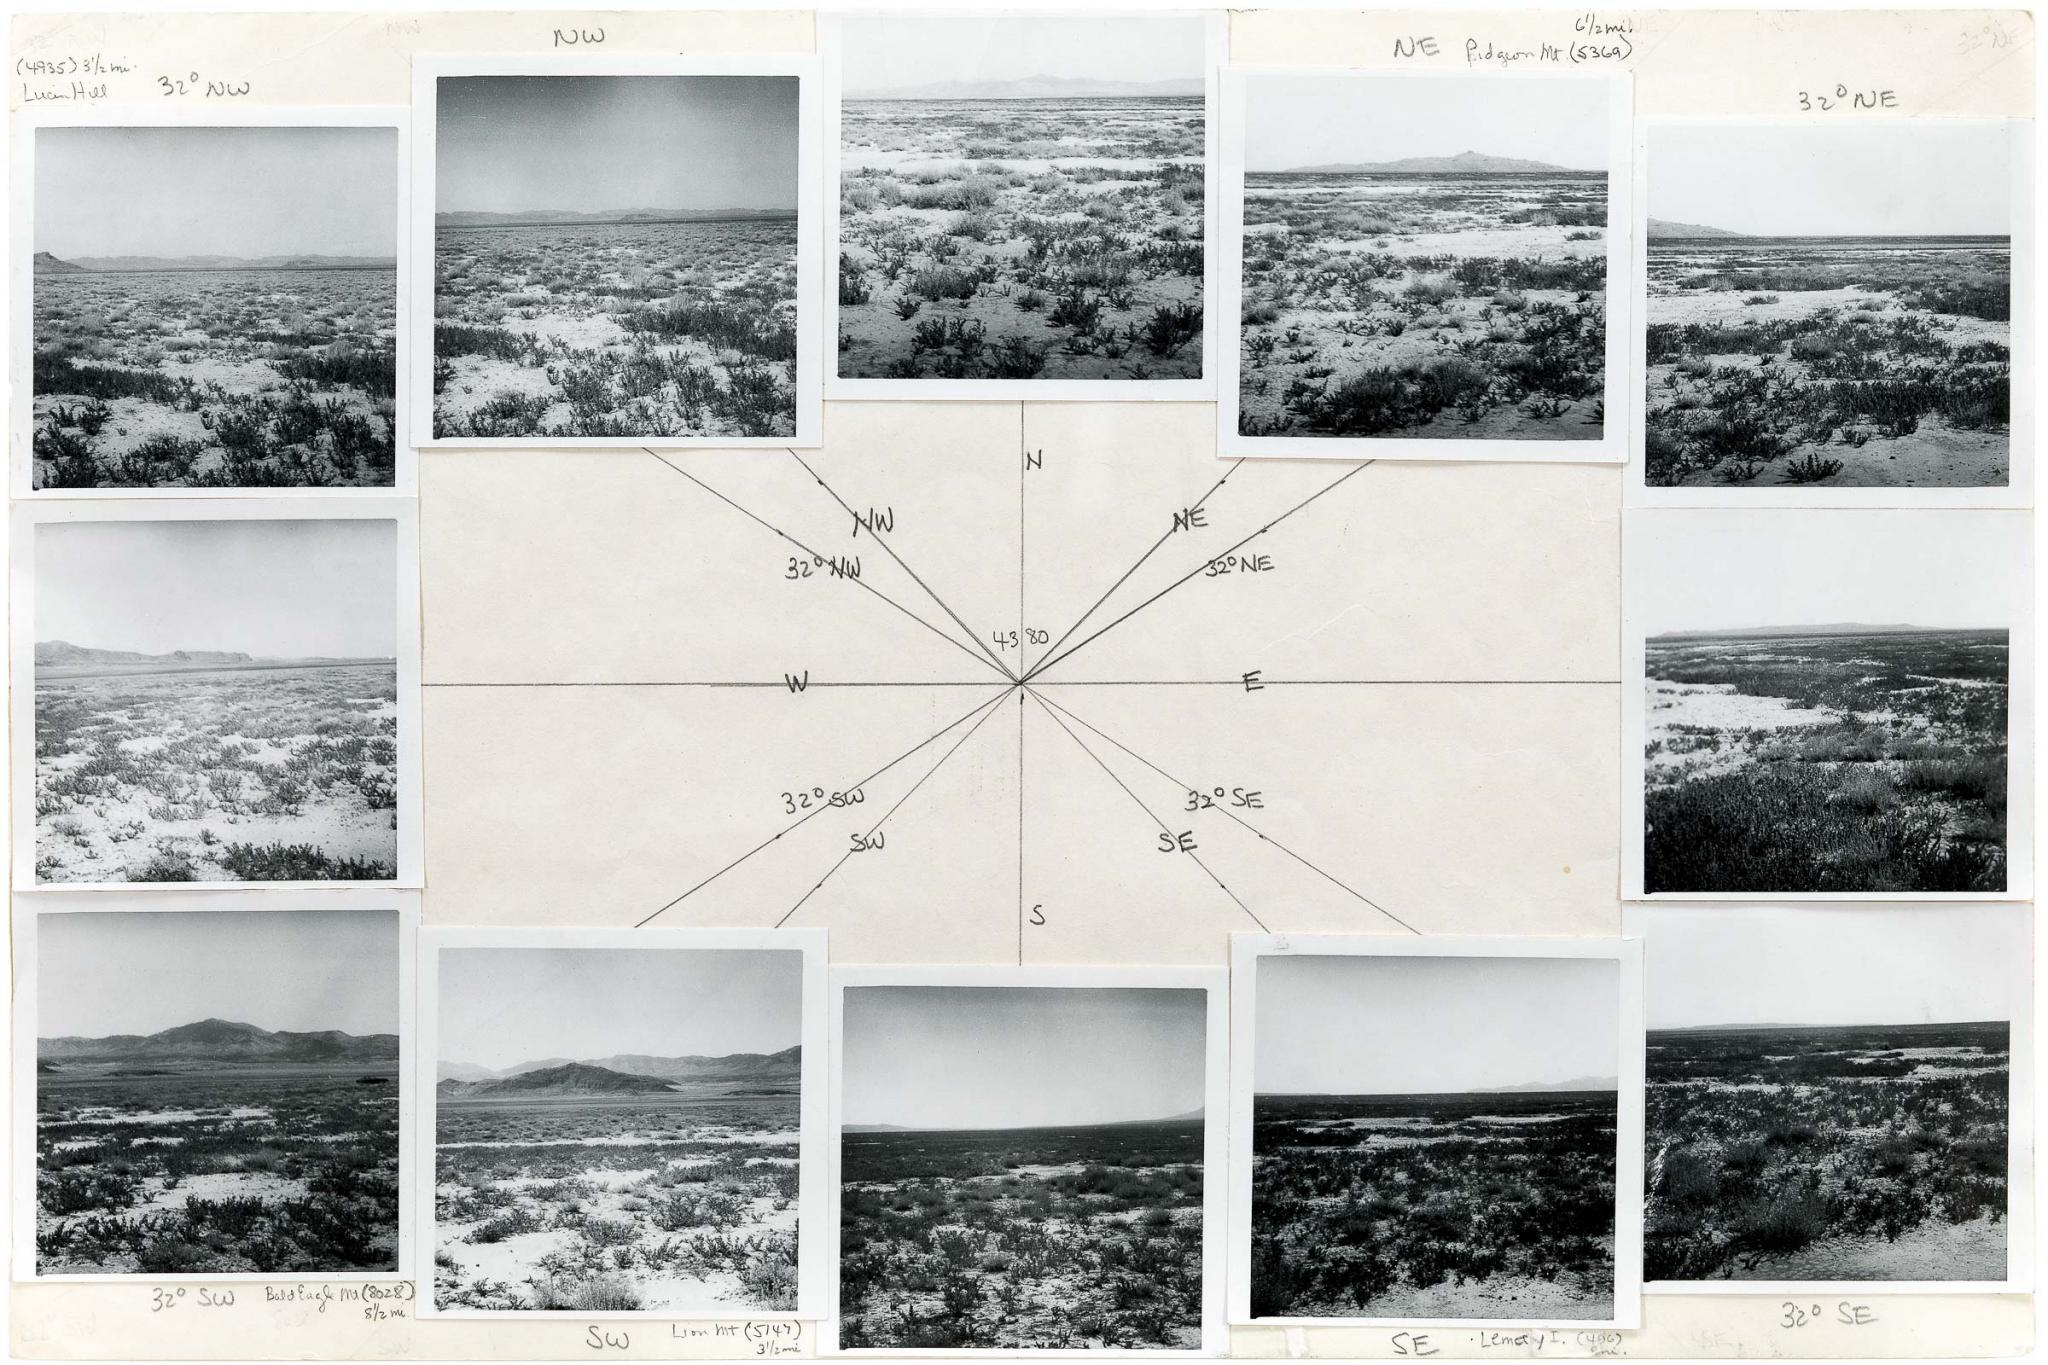 A preparatory on paper work for Sun Tunnels using graphite and twelve black and white photographs  showing the landscape panorama surrounding the Sun Tunnels site.